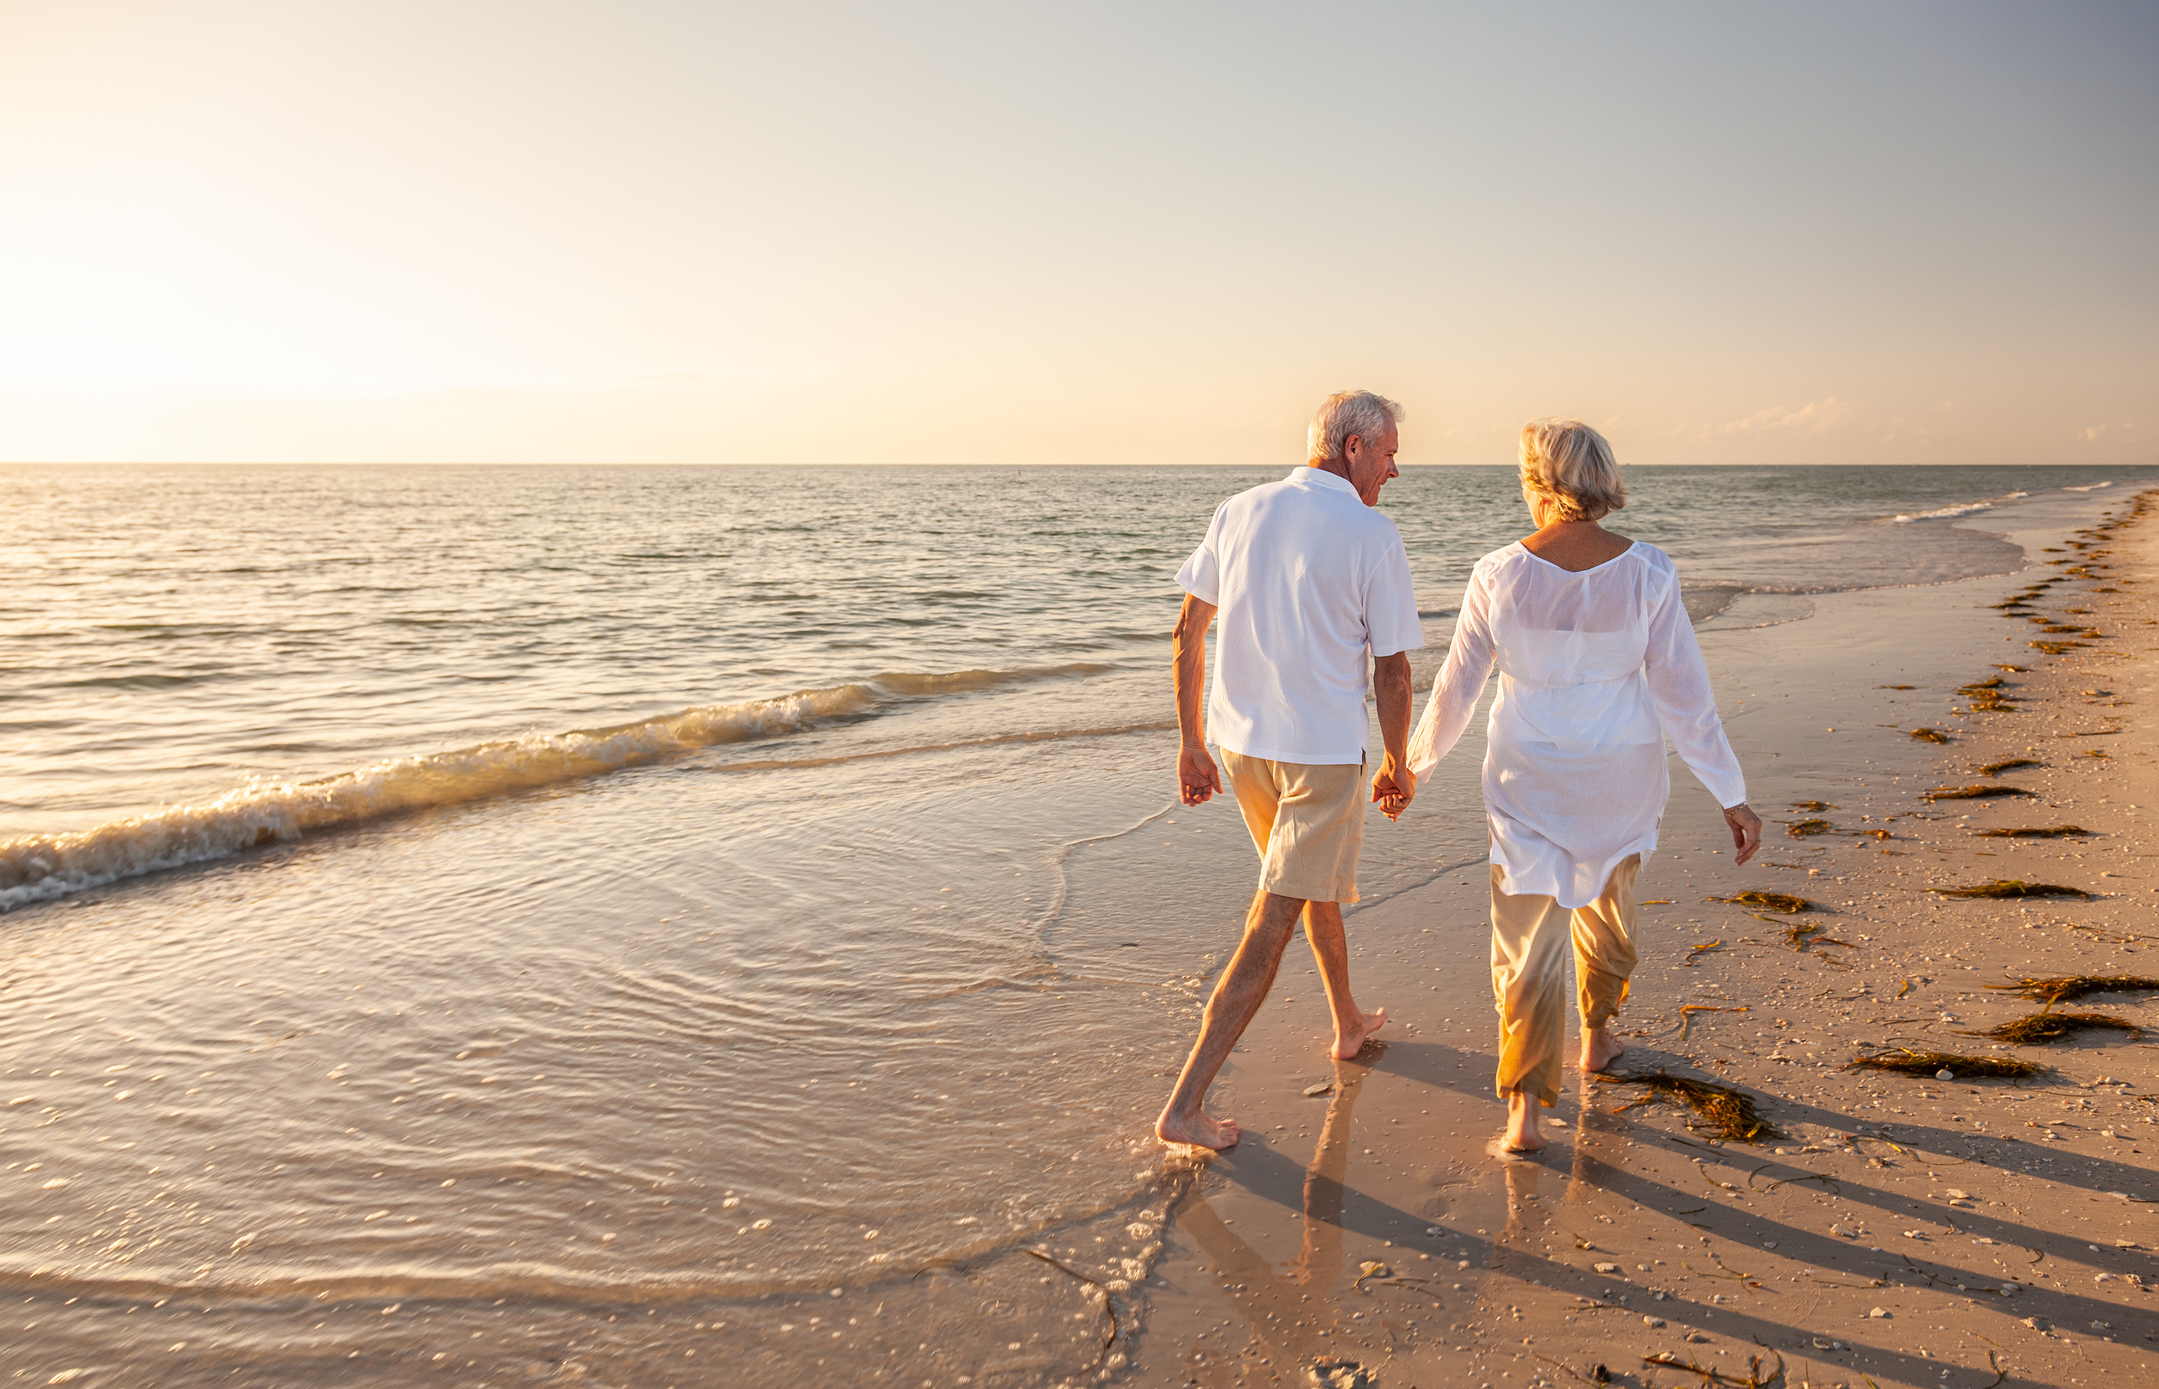 Two senior travelers walking on the beach together.